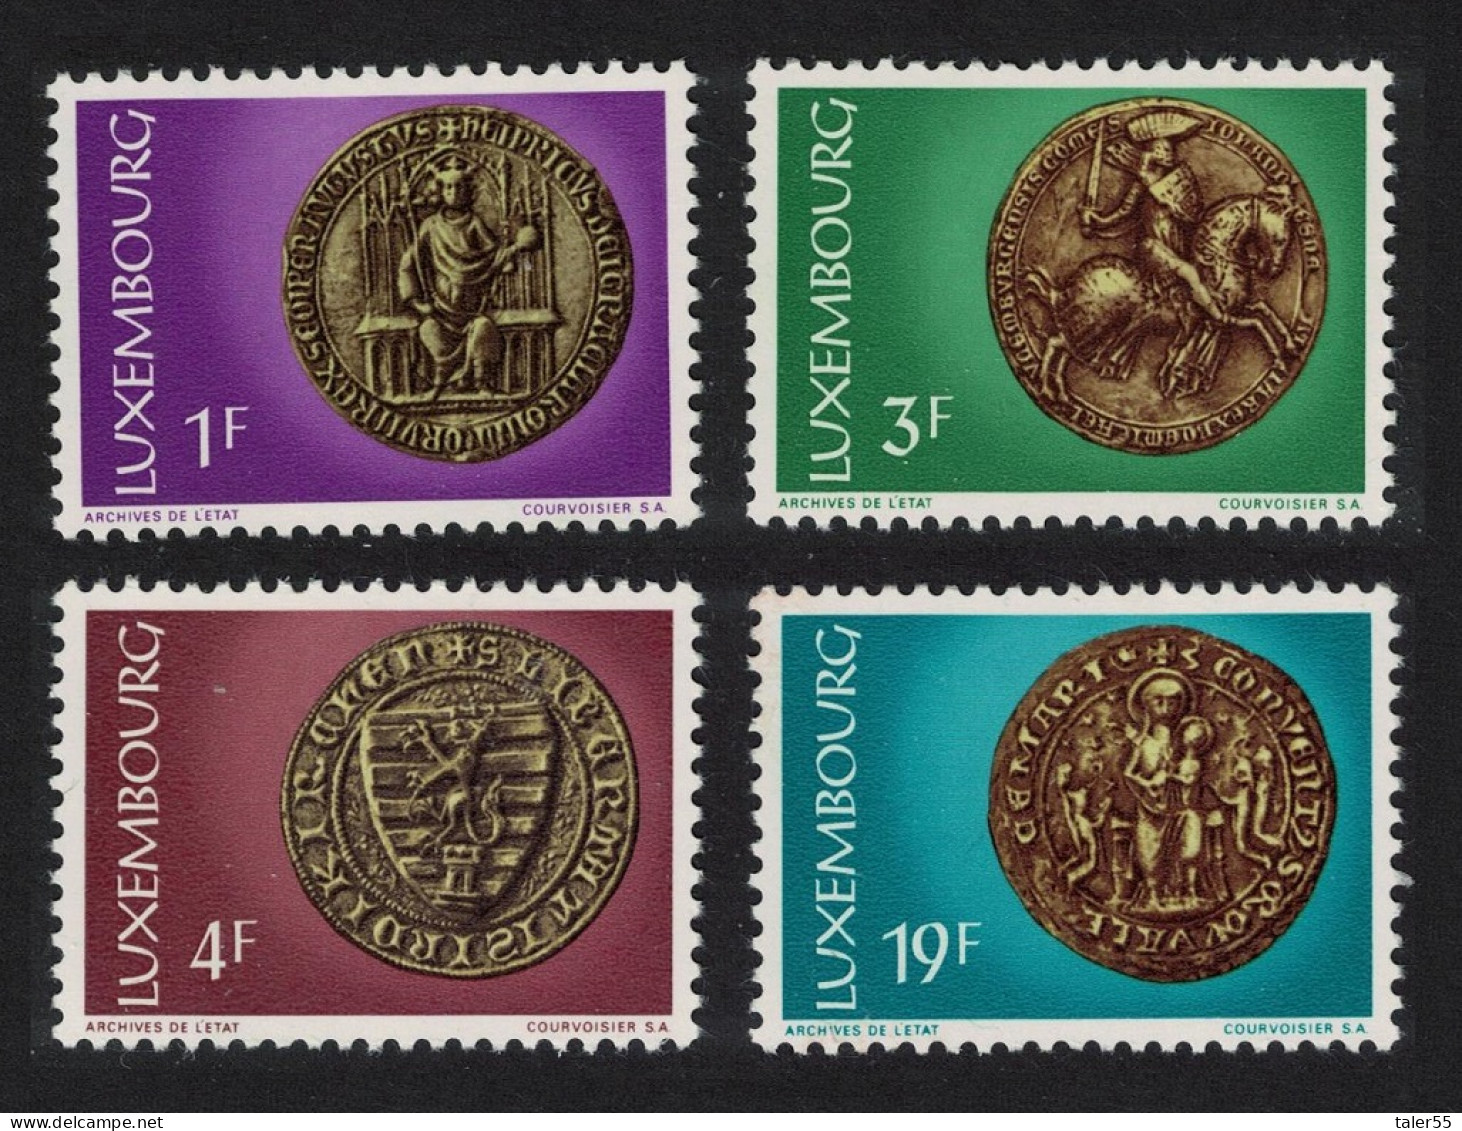 Luxembourg Seals In Luxembourg State Archives 4v 1974 MNH SG#922-925 MI#878-881 - Ongebruikt